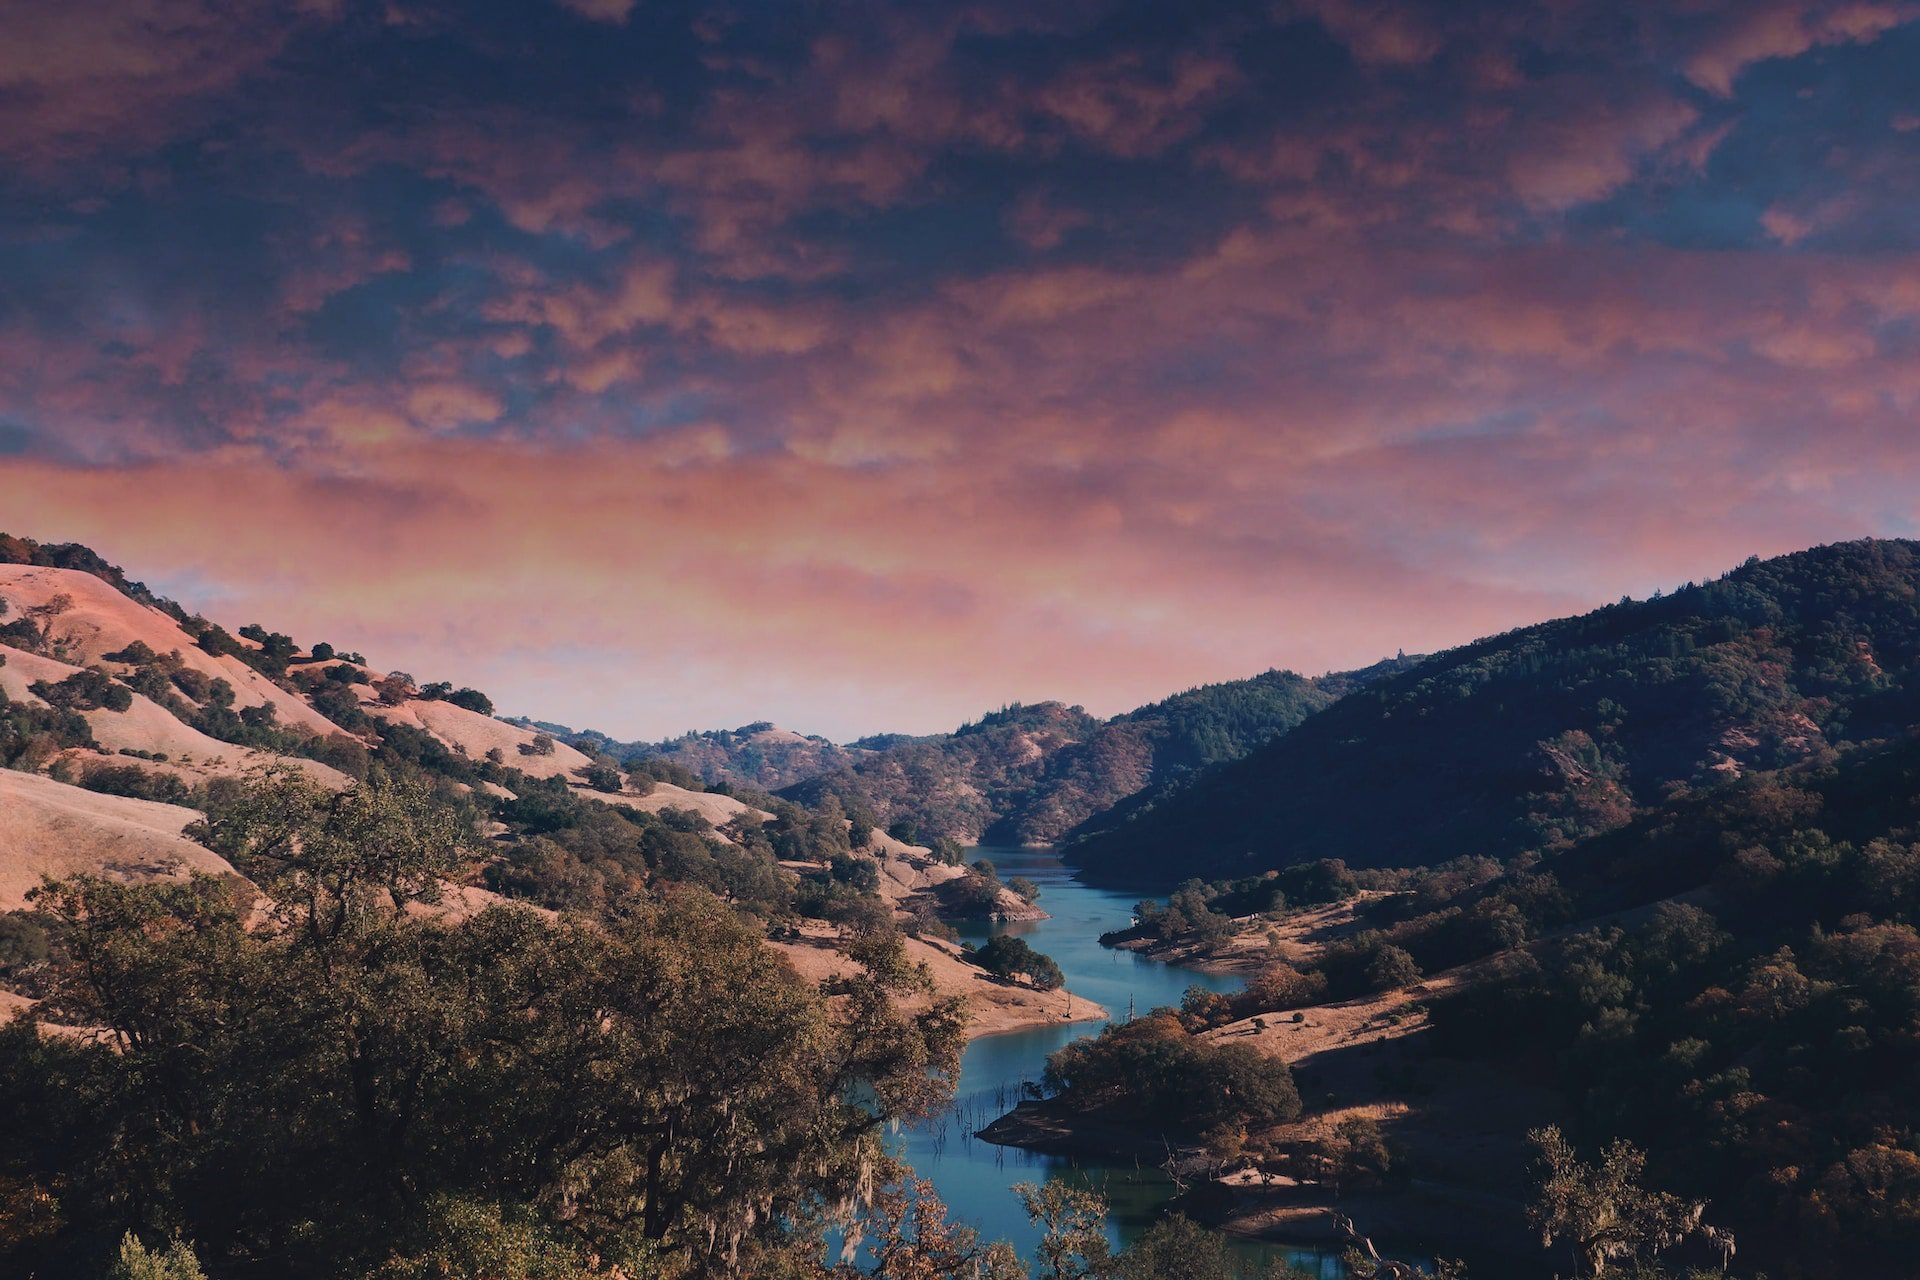 Lake surrounded by mountains at sunset in Sonoma, California.